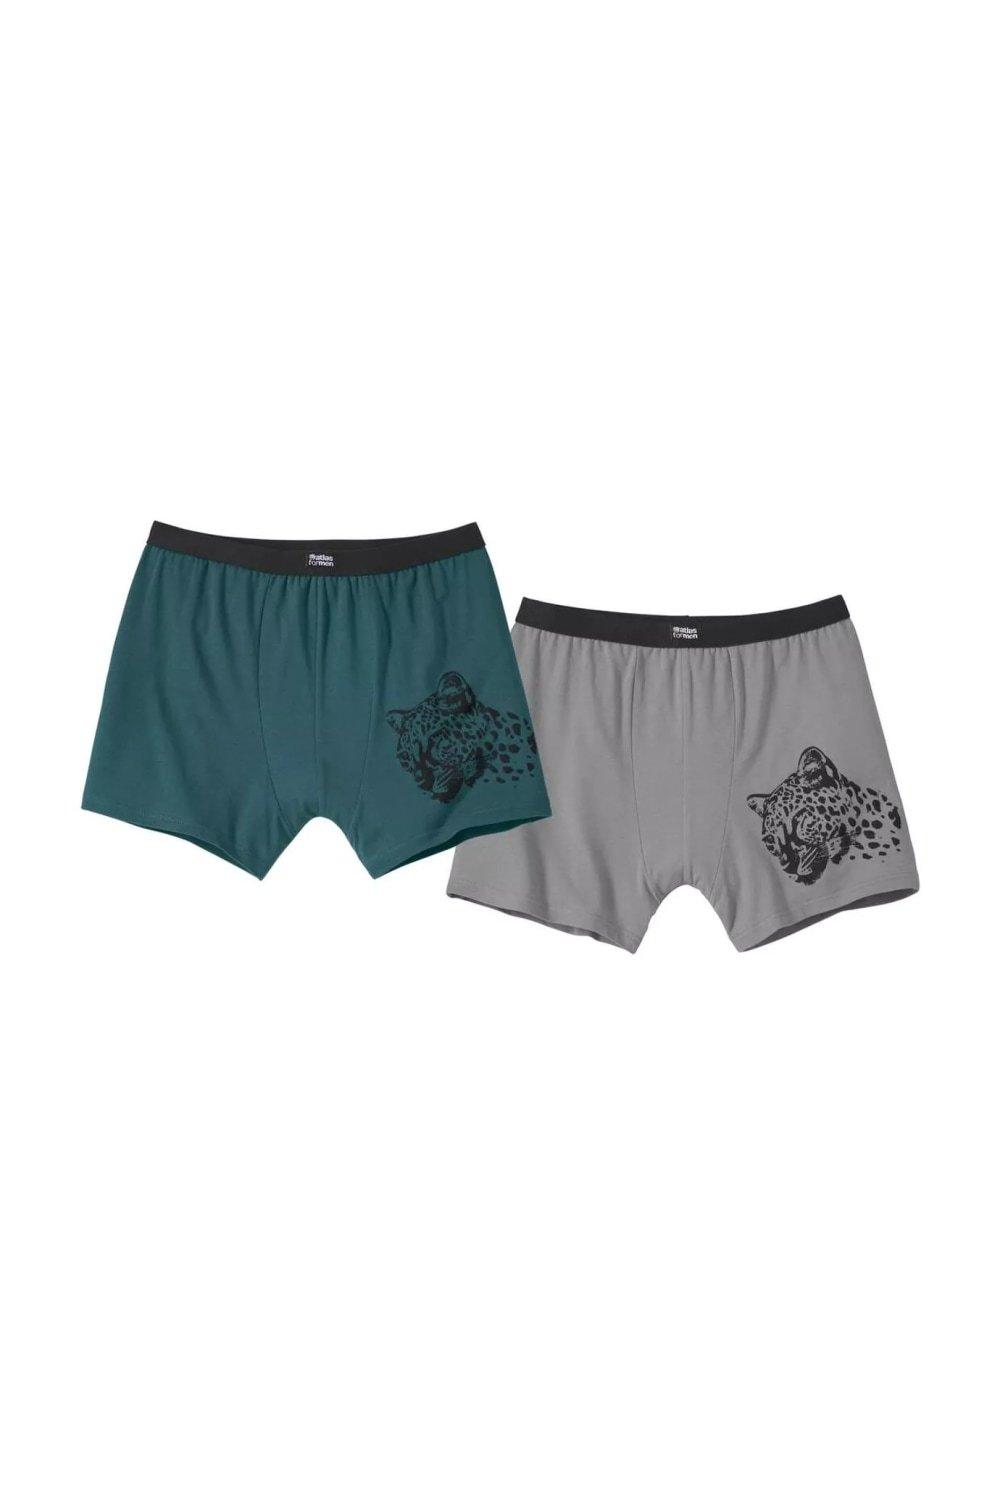 Stretch Boxer Shorts (Pack of 2)